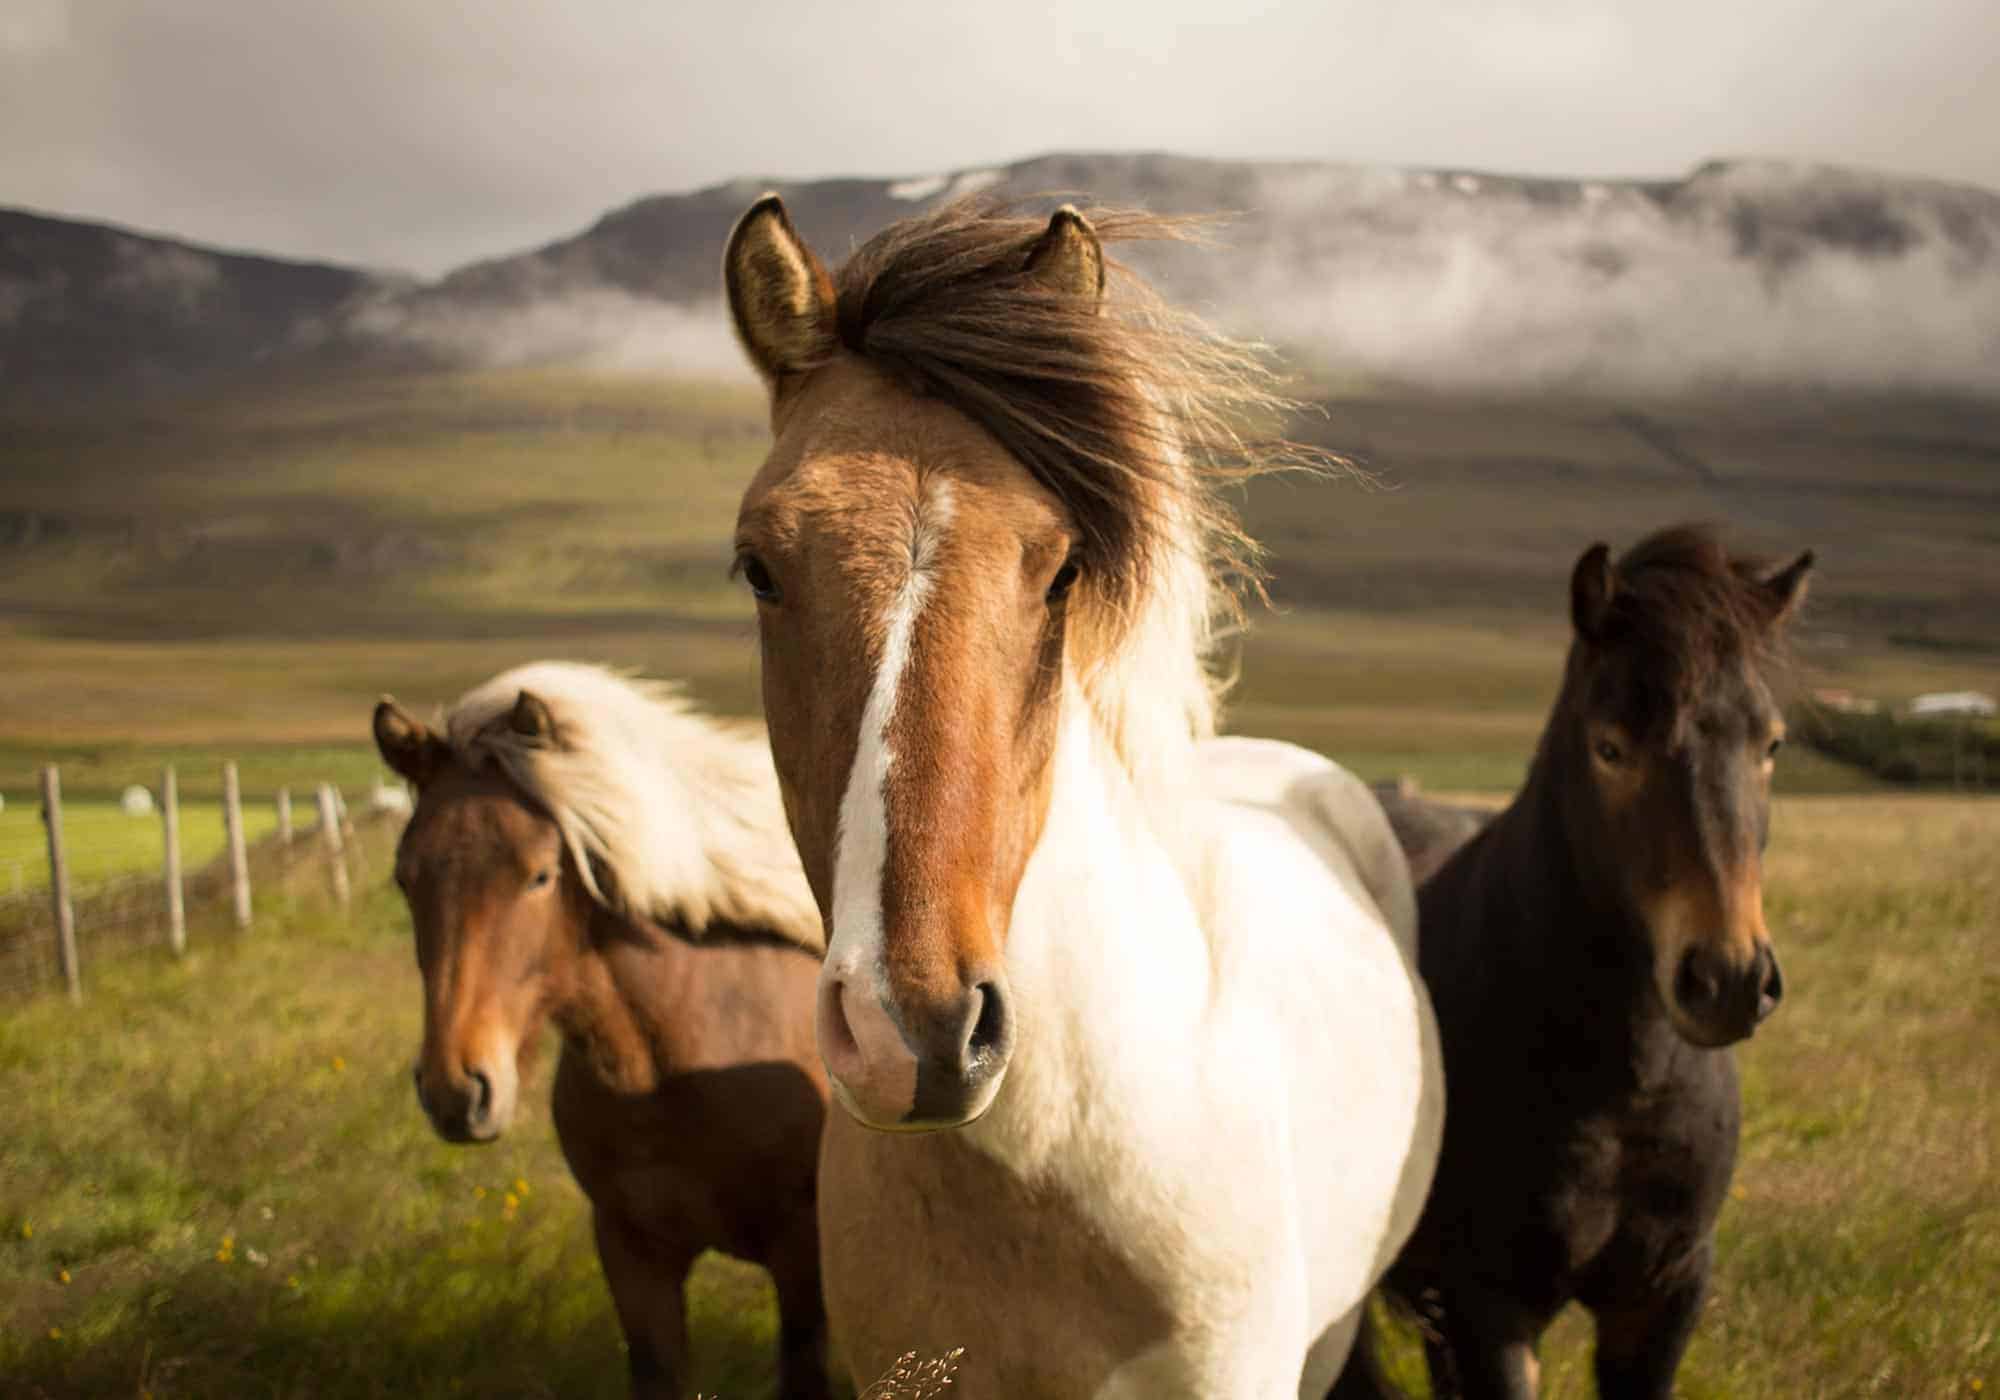 Three Icelandic horses stand in a grassy field facing the camera.